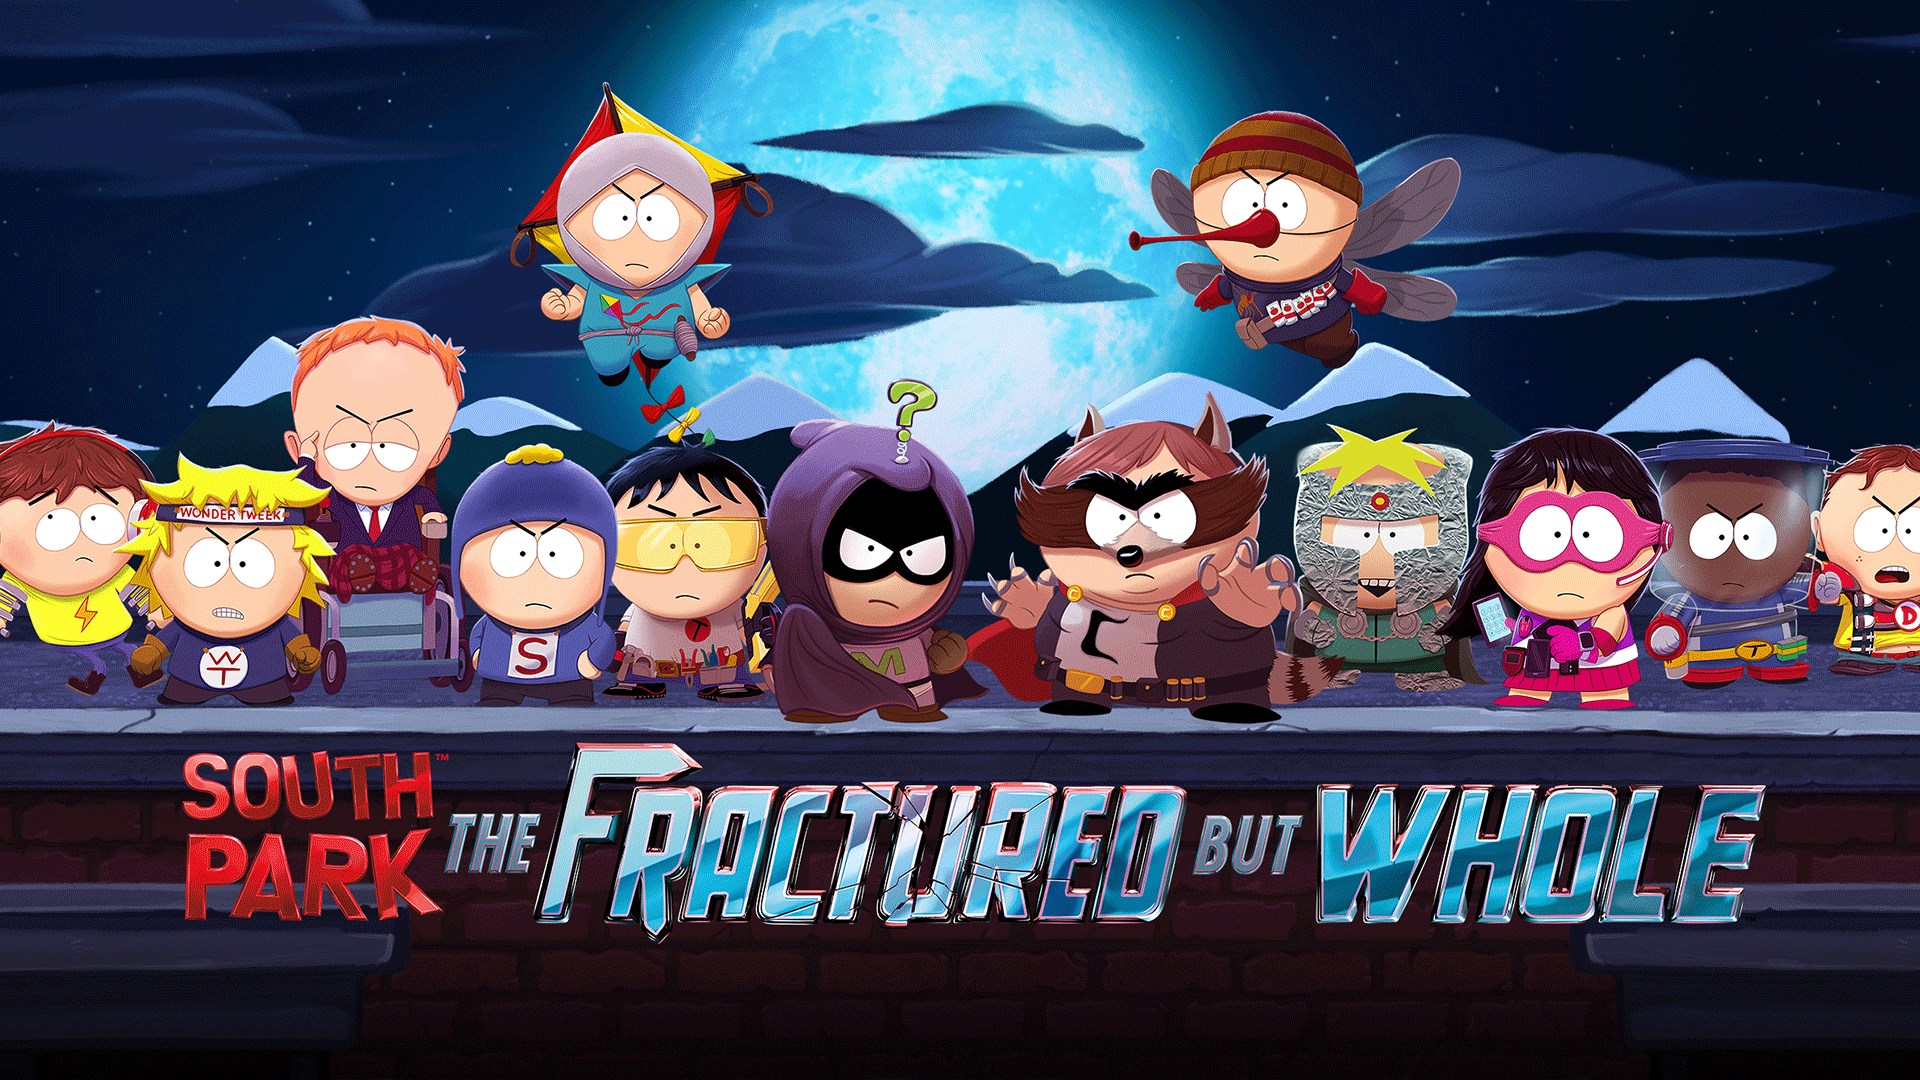 South park the fractured but whole купить ключ steam фото 82